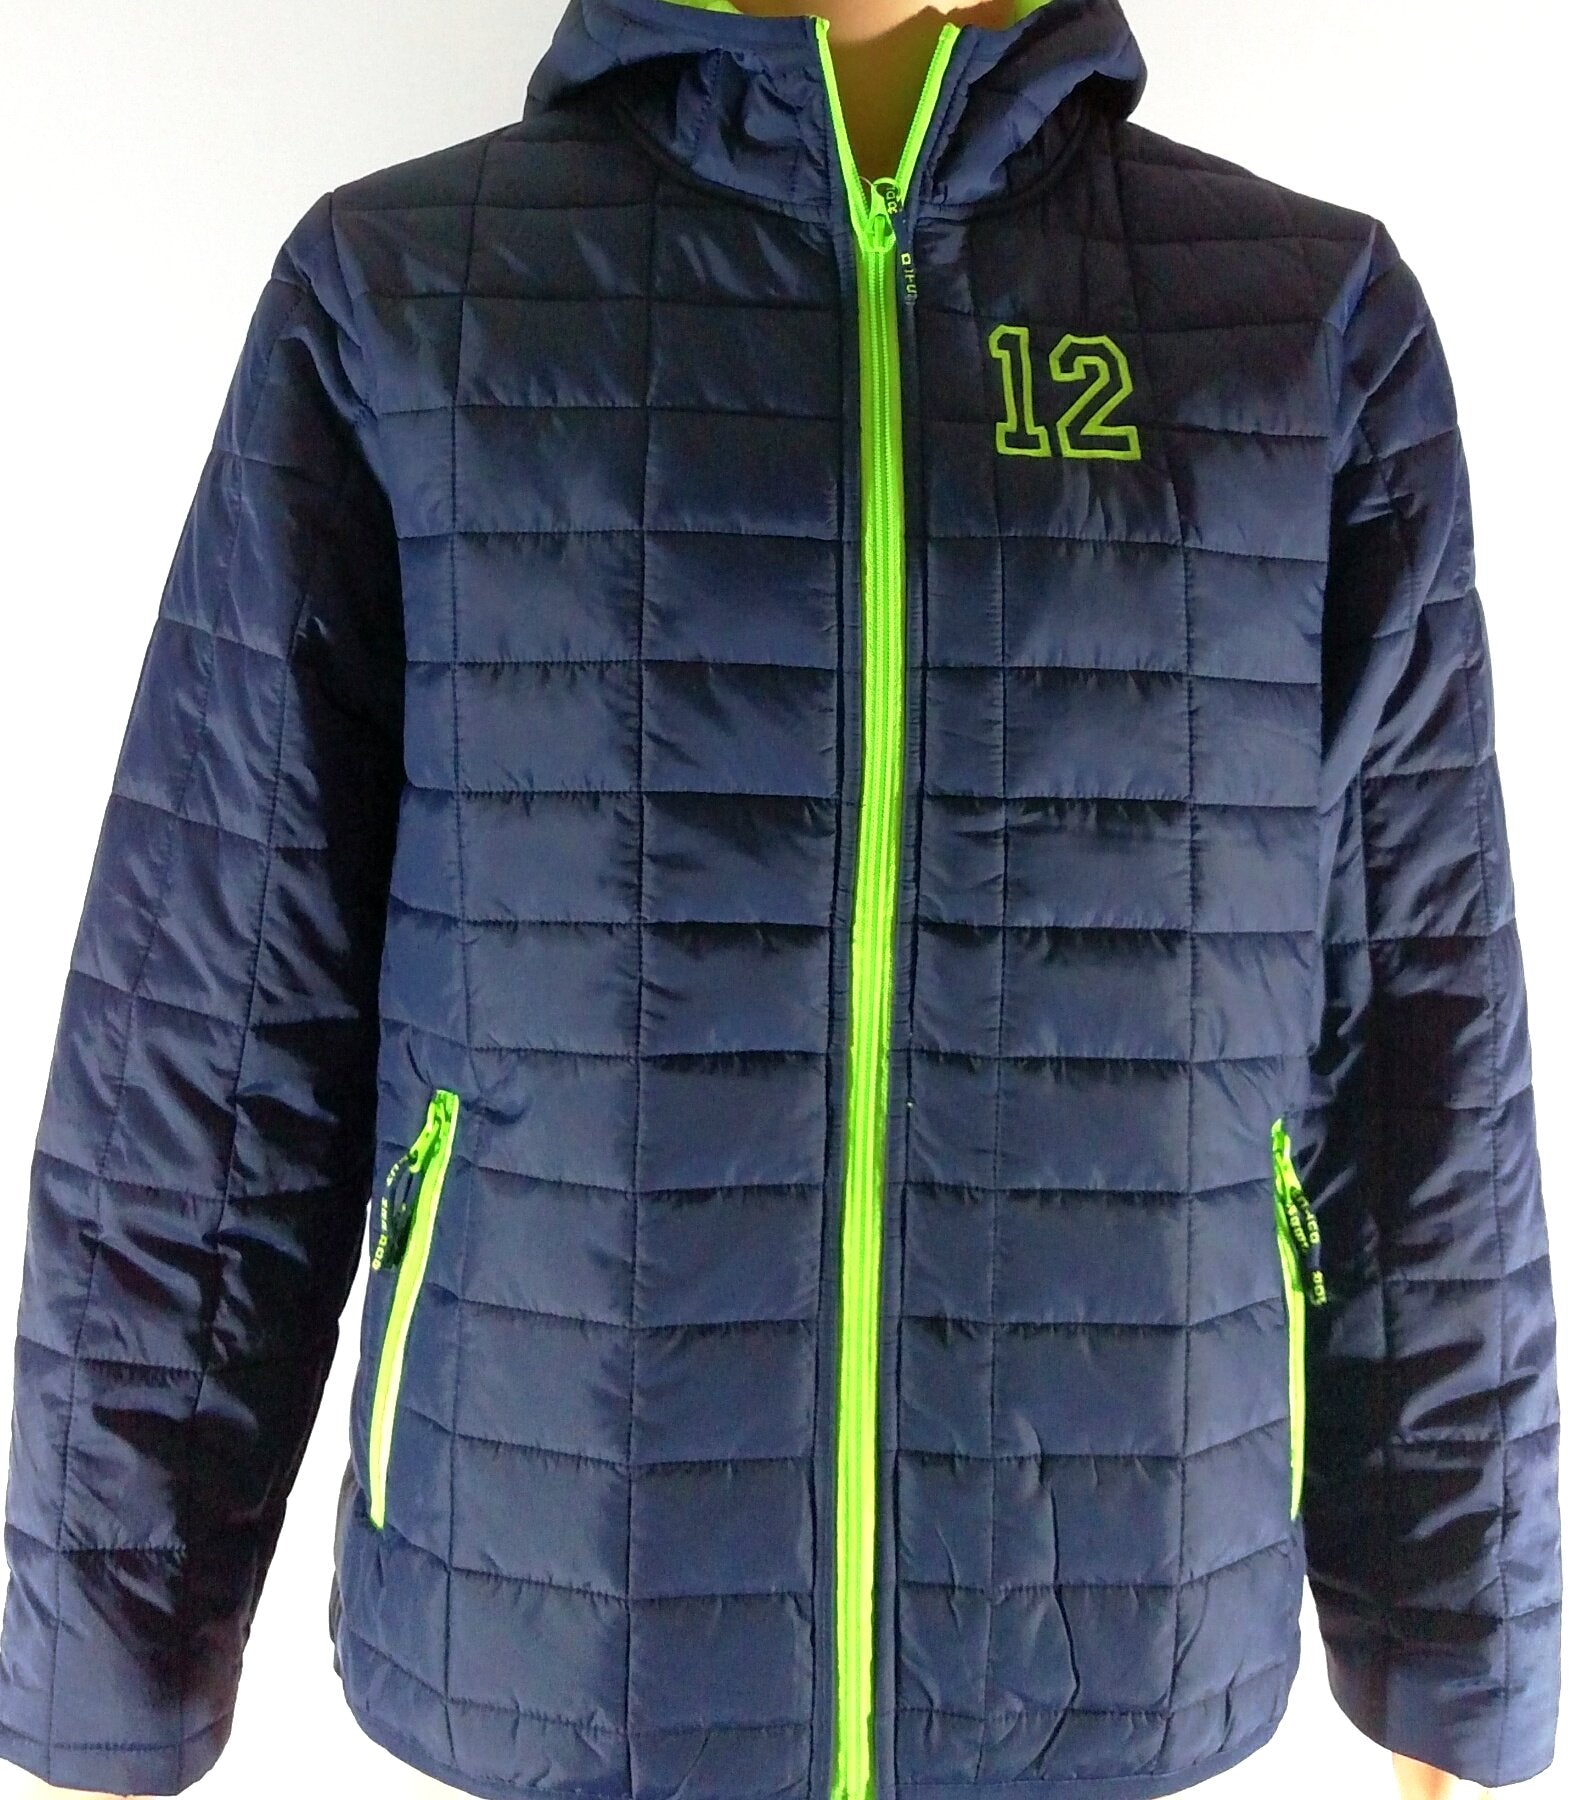 Seattle Seahawks inspired 12 Go Hawks Packable Insulated Jacket Layer Navy Lime